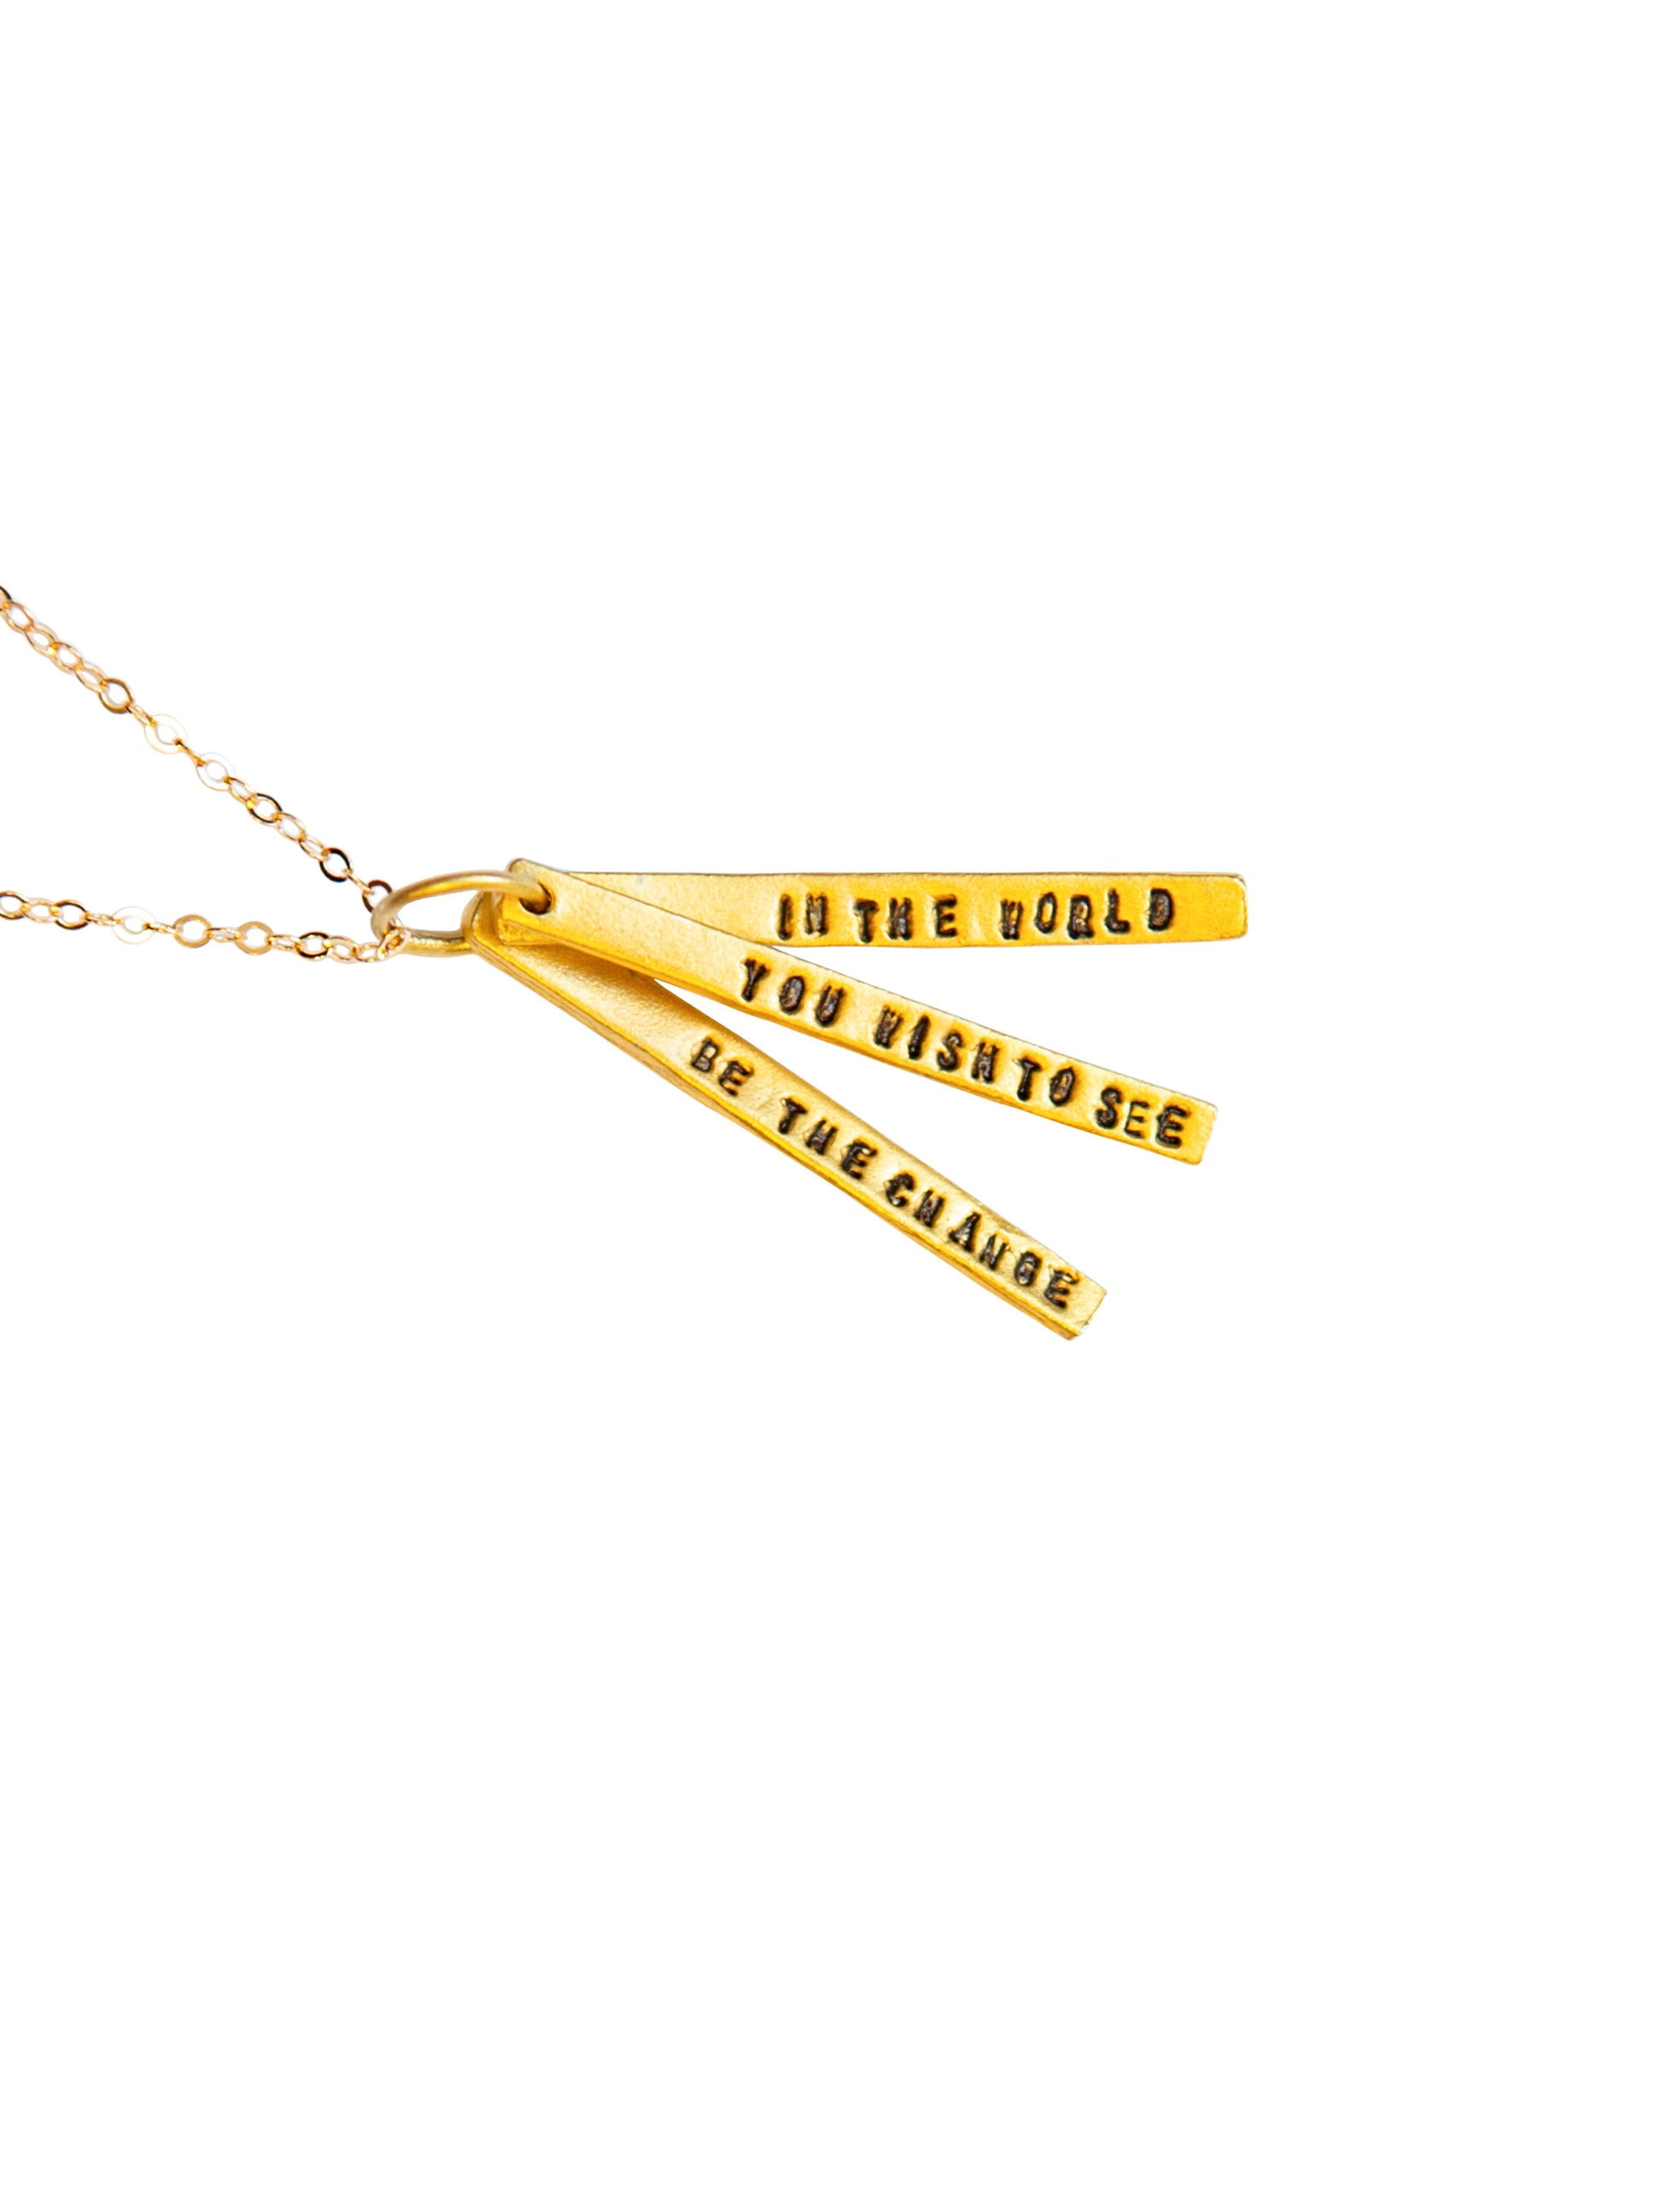 Chocolate & Steel Long-Bar Quote Necklace Gandhi Weston Table